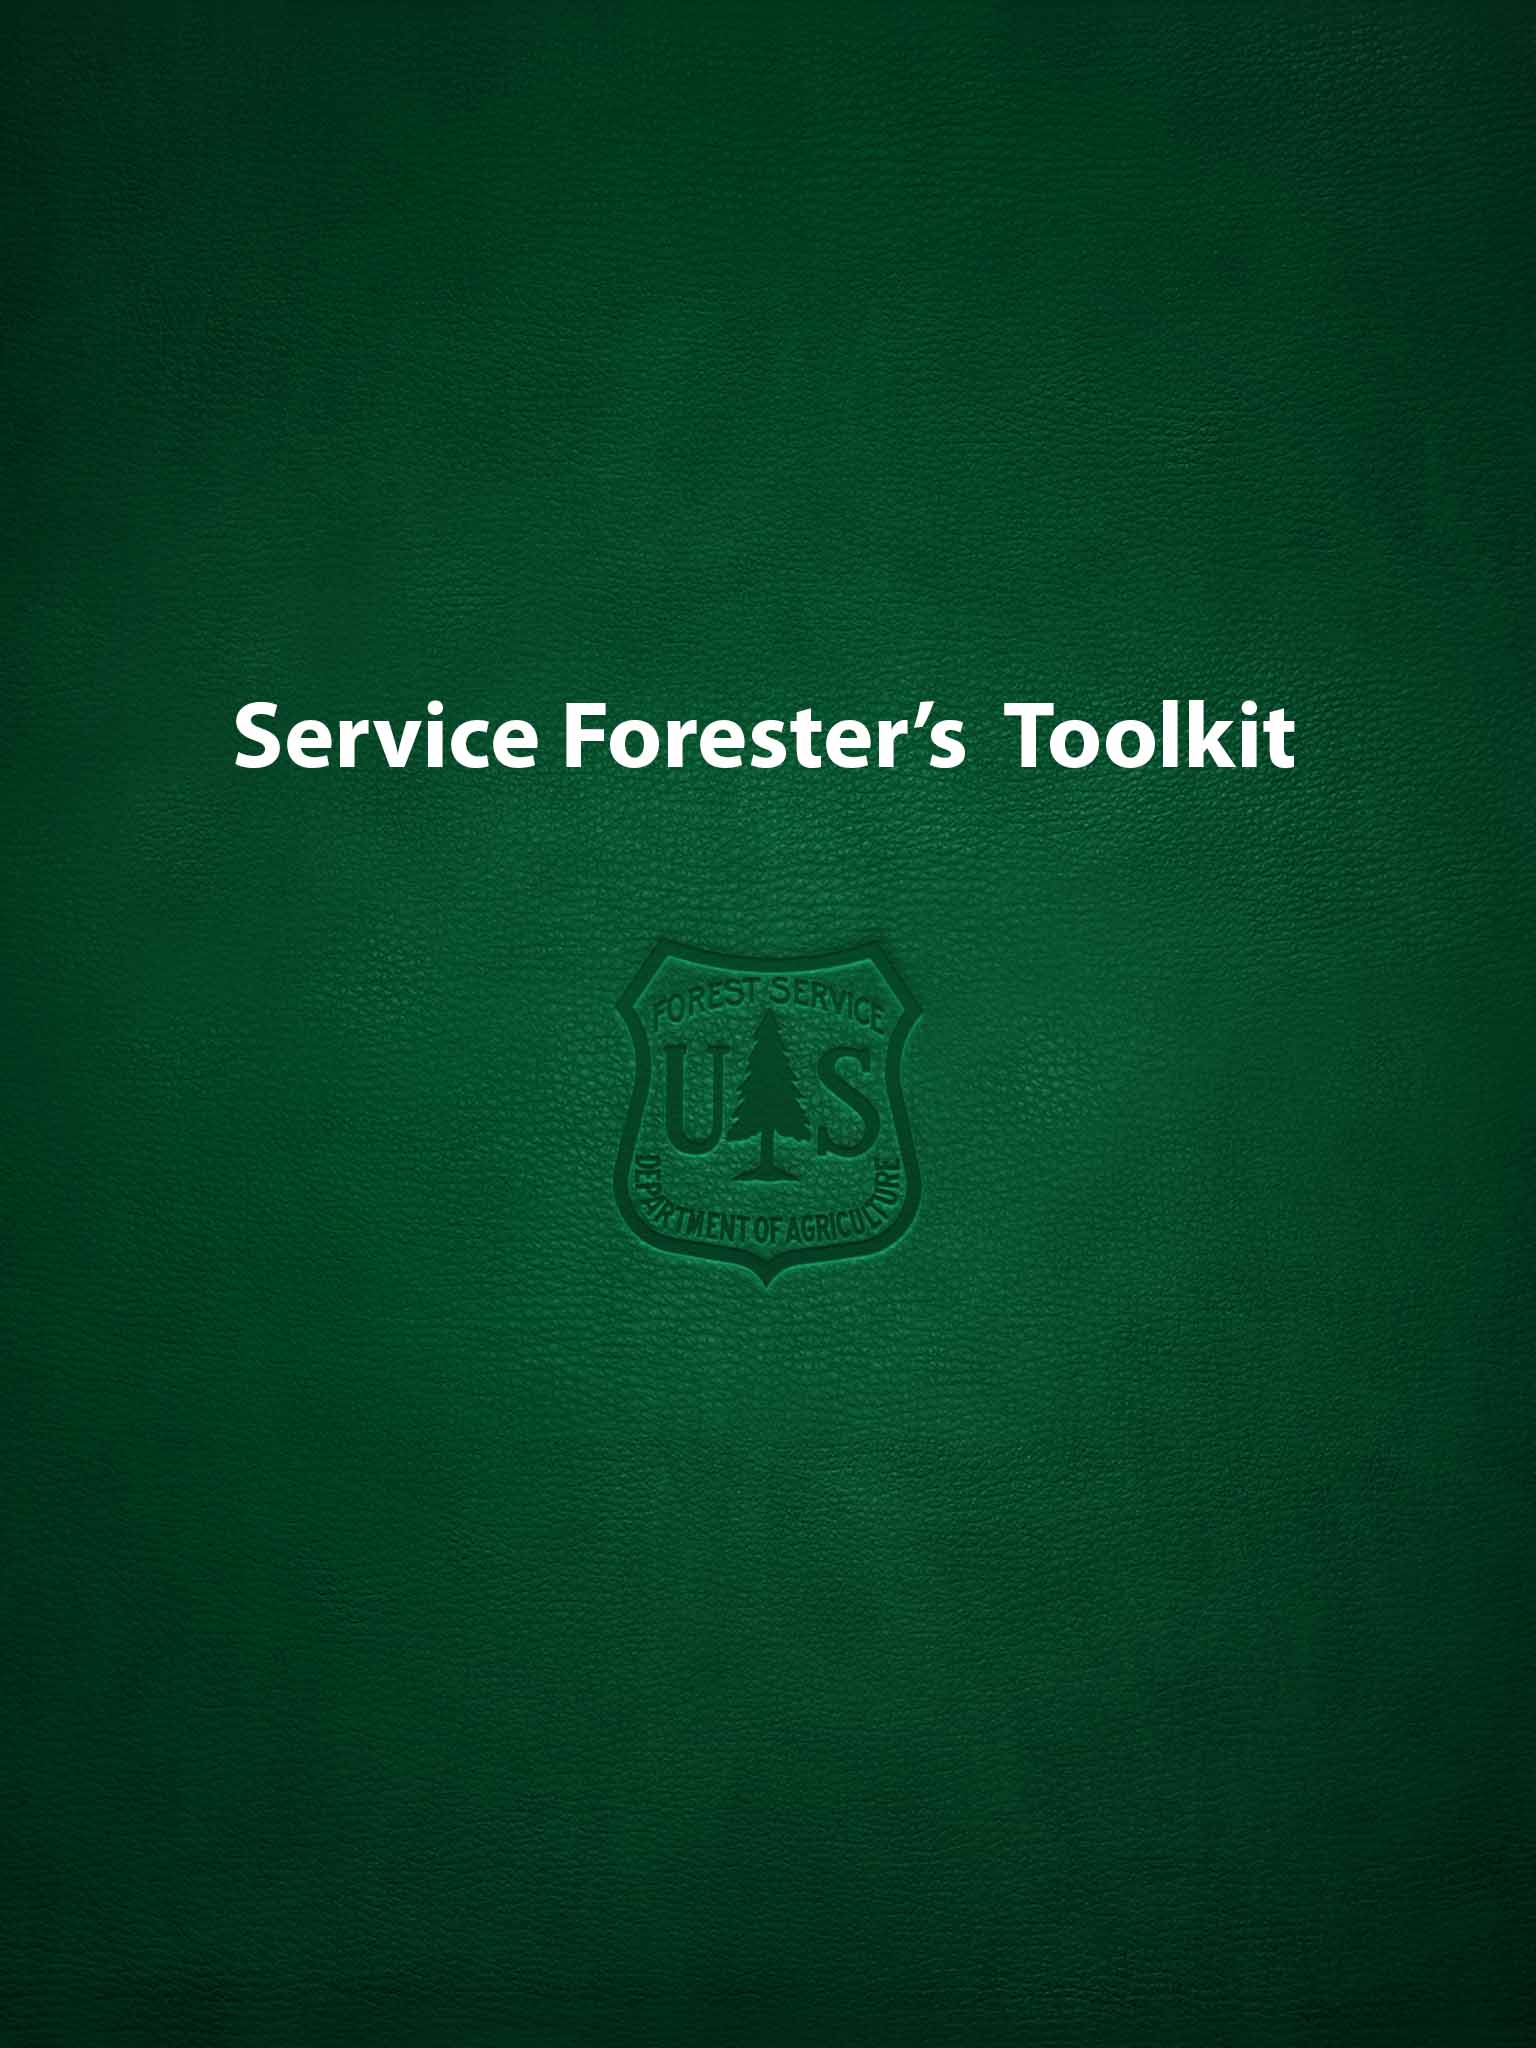 Professional foresters have long relied on the 135-page Service Forester's Handbook for on-the-go access to the formulas, facts and figures they need. The pocket-sized weather-resistant field-guide helps foresters convert figures, calculate volumes and dozens of other key calculations.  
This spring UGA Extension and Southern Regional Forestry Extension have released the first electronic and interactive version of the field guide.